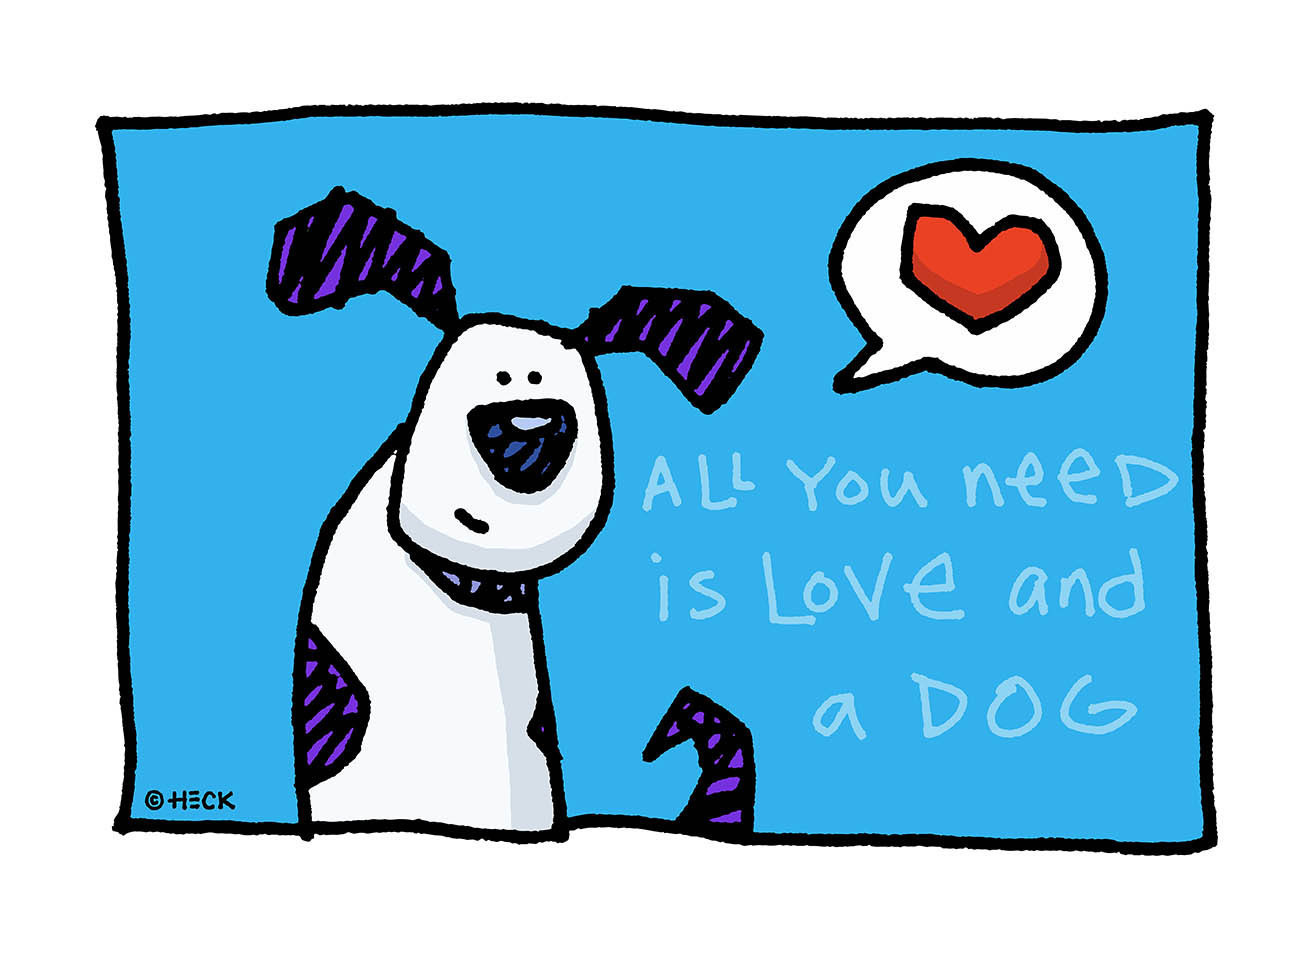 Ed Heck - All you need is love and a dog